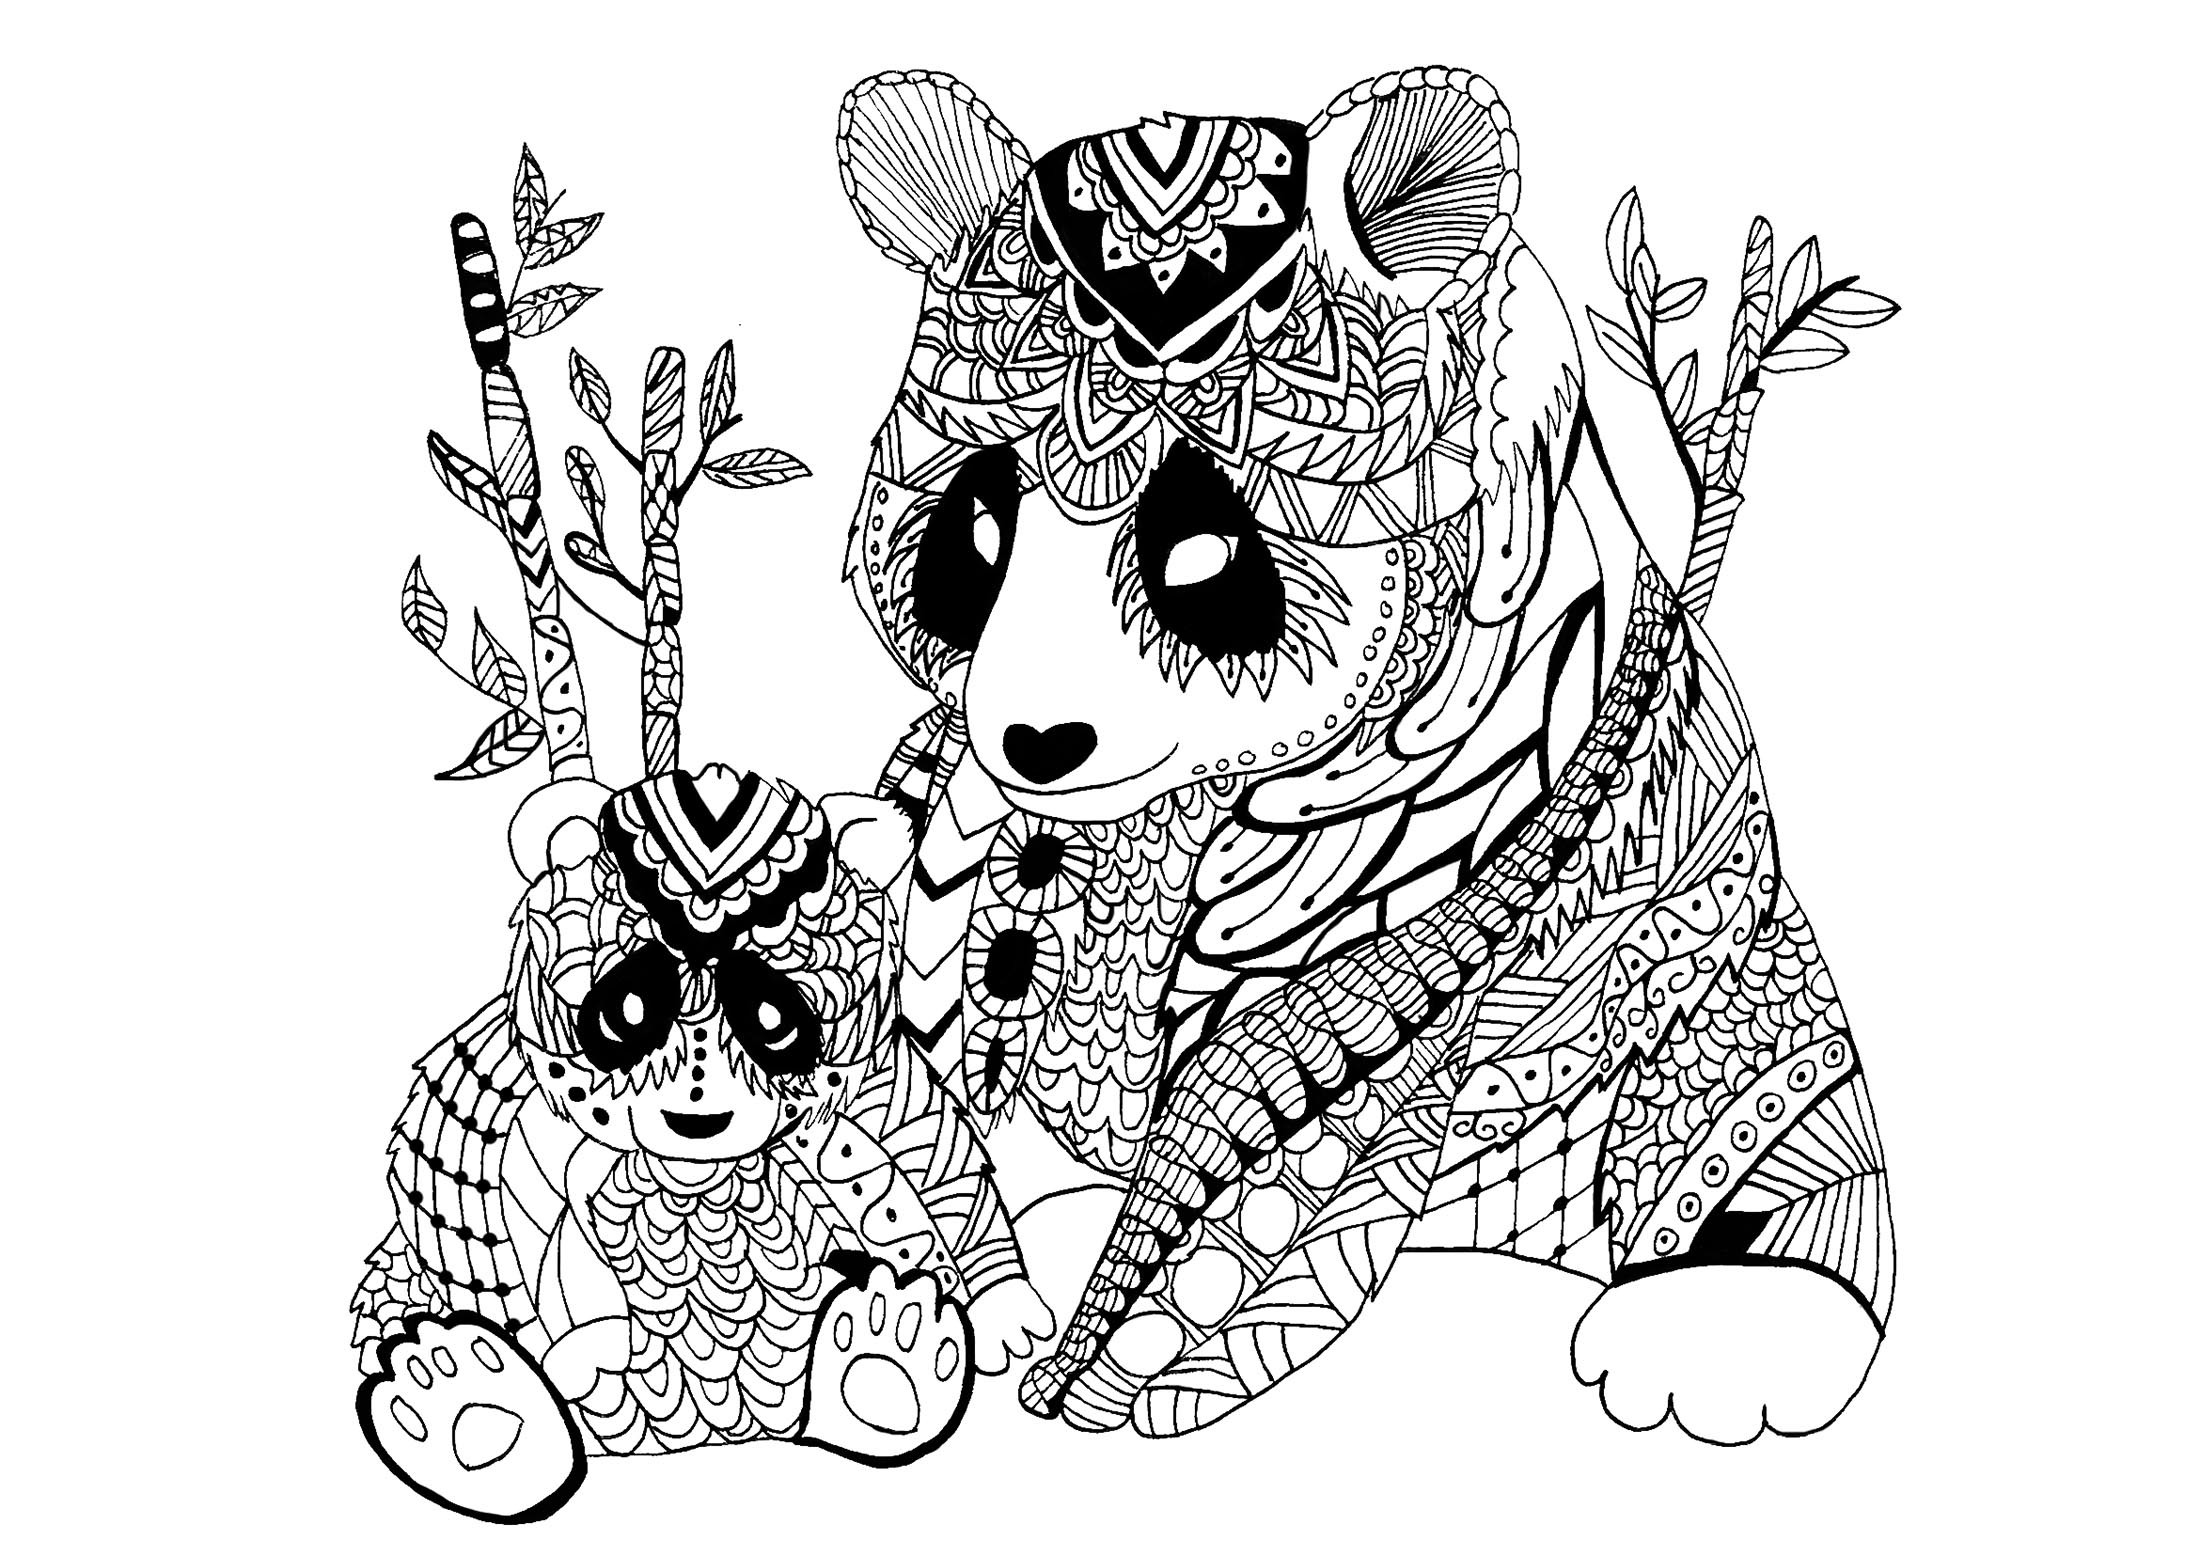 Panda Coloring Pages For Adults
 Panda celine P&a Adult Coloring Pages